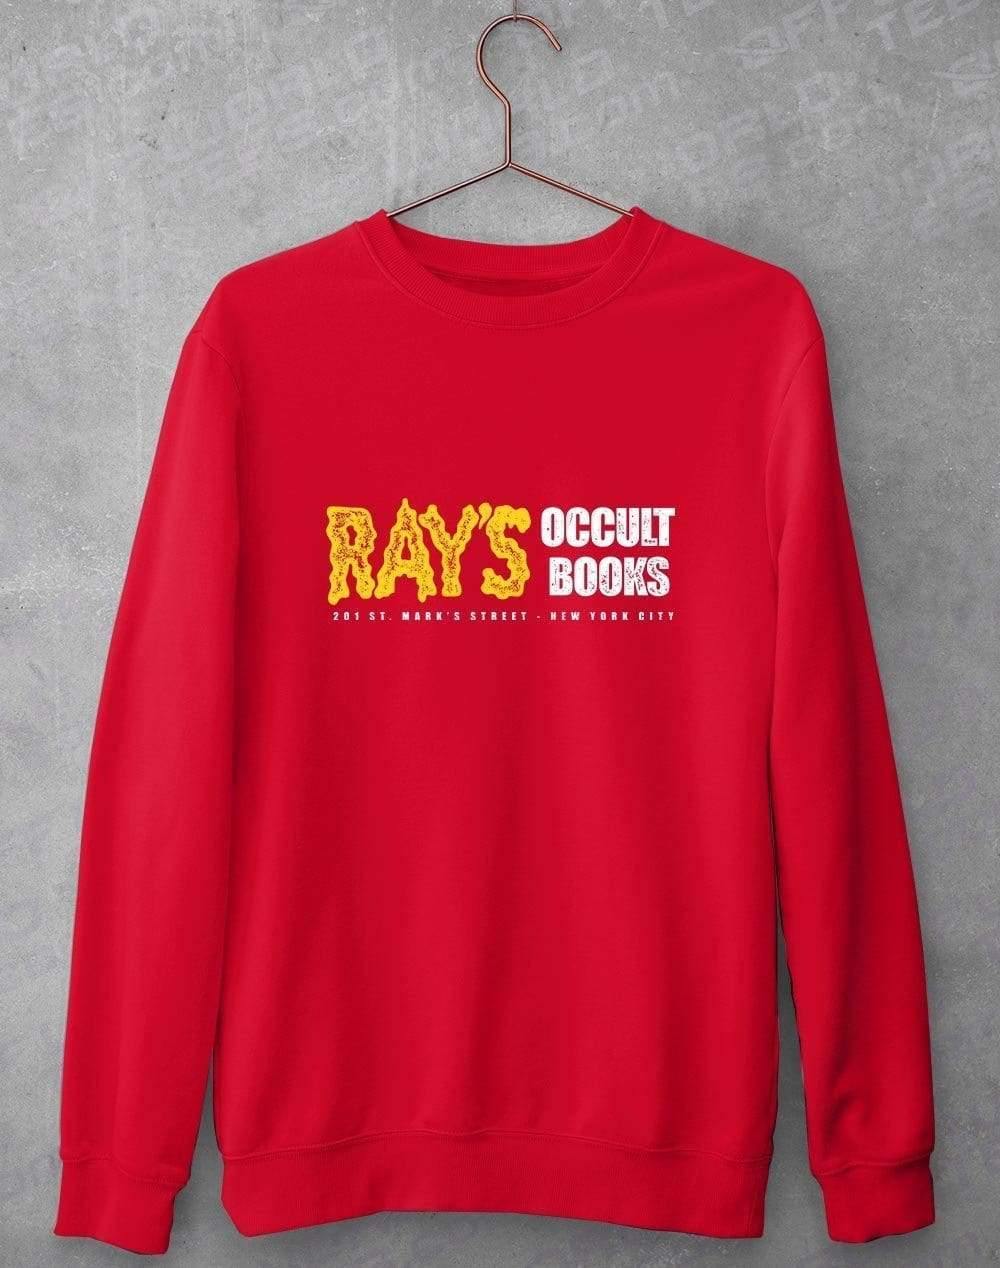 Rays Occult Books Sweatshirt S / Red  - Off World Tees